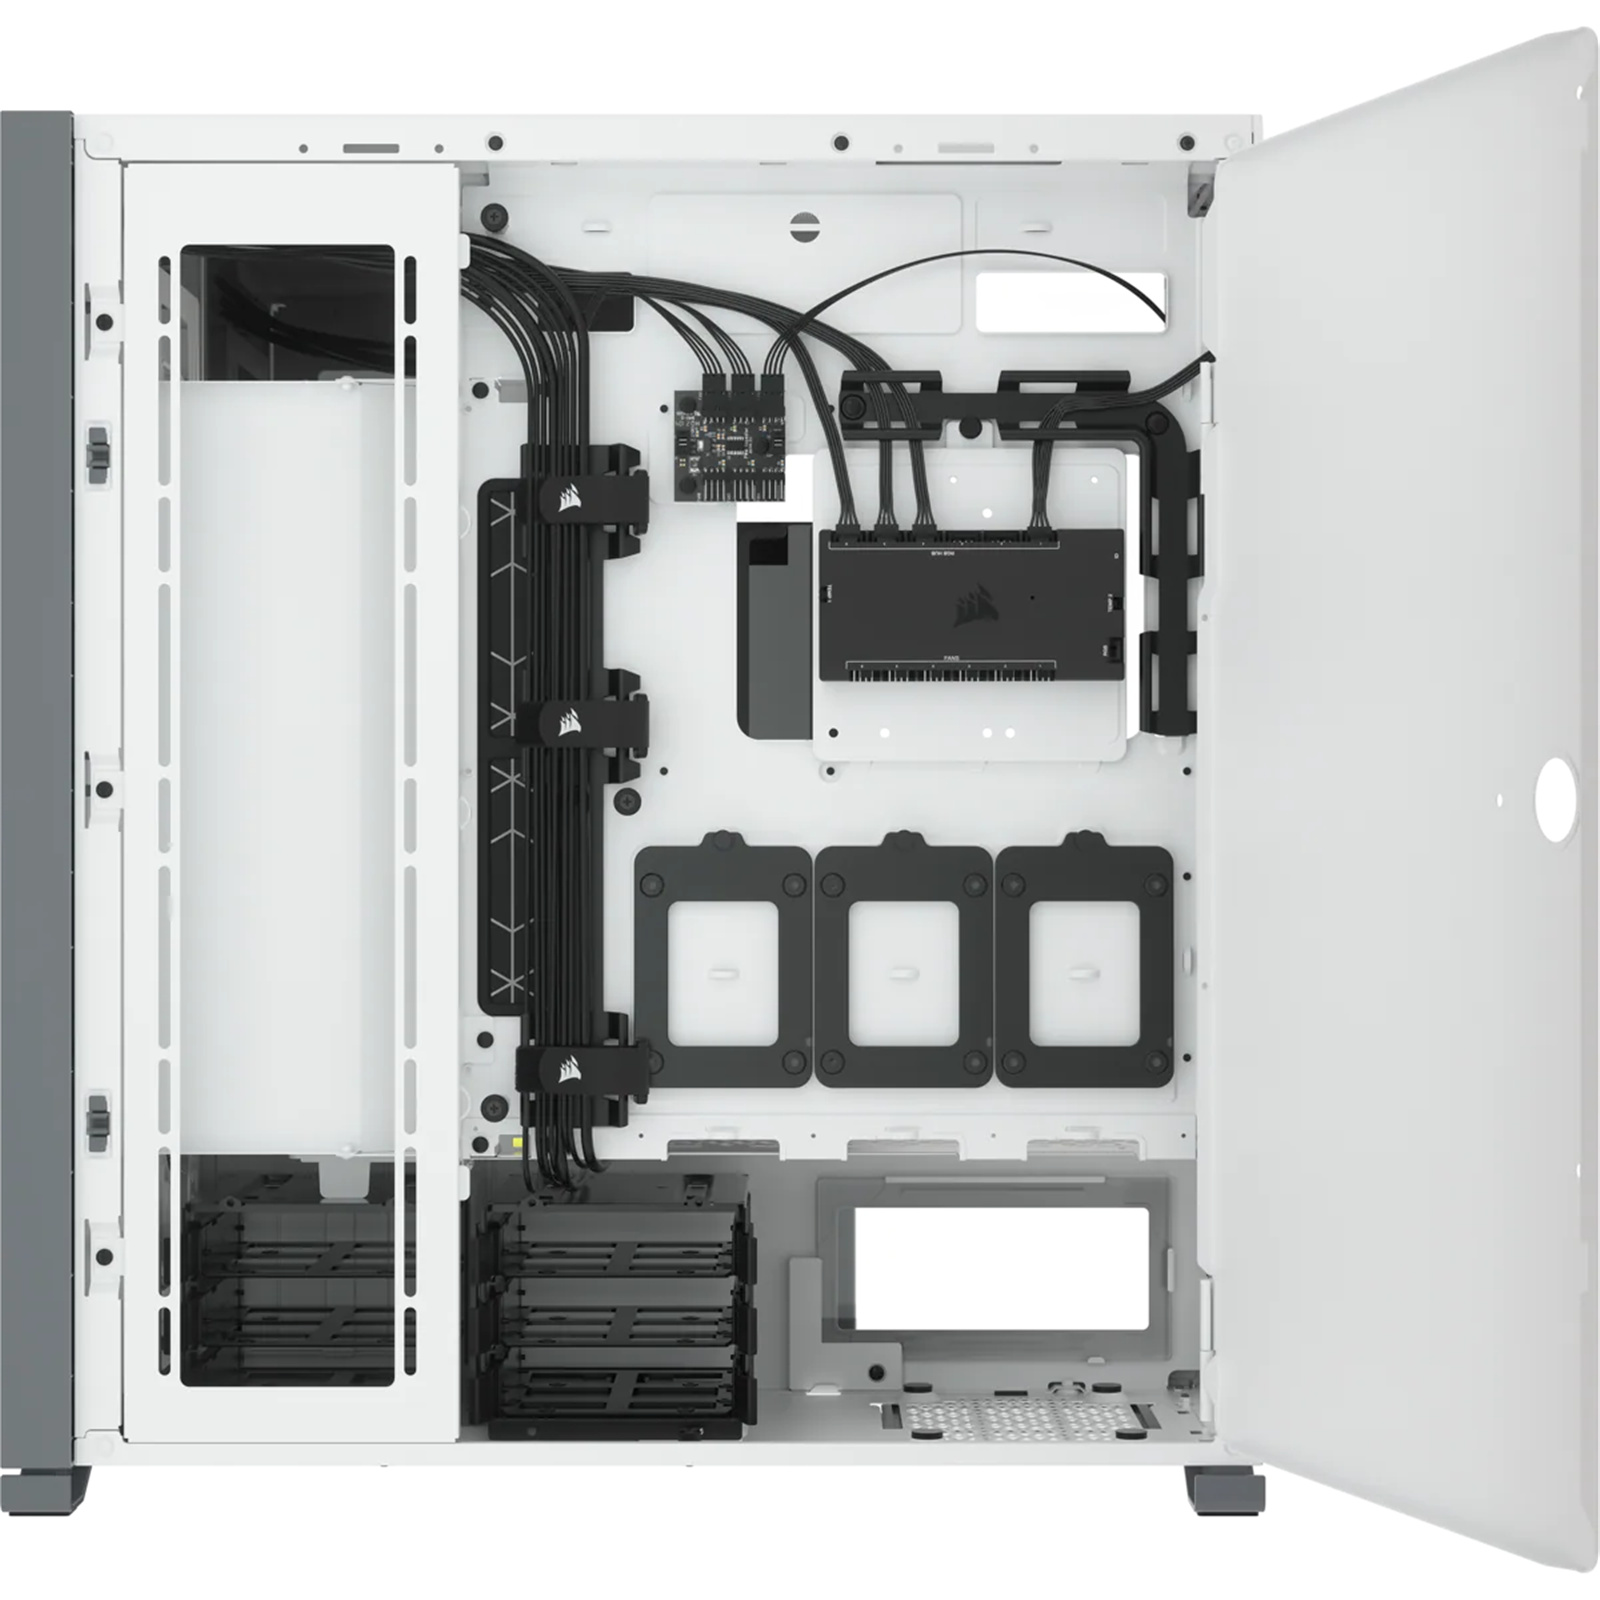 Buy the Corsair iCUE 7000X RGB White ATX MidTower Gaming Case Tempered  Glass,... ( CC-9011227-WW ) online - PBTech.com